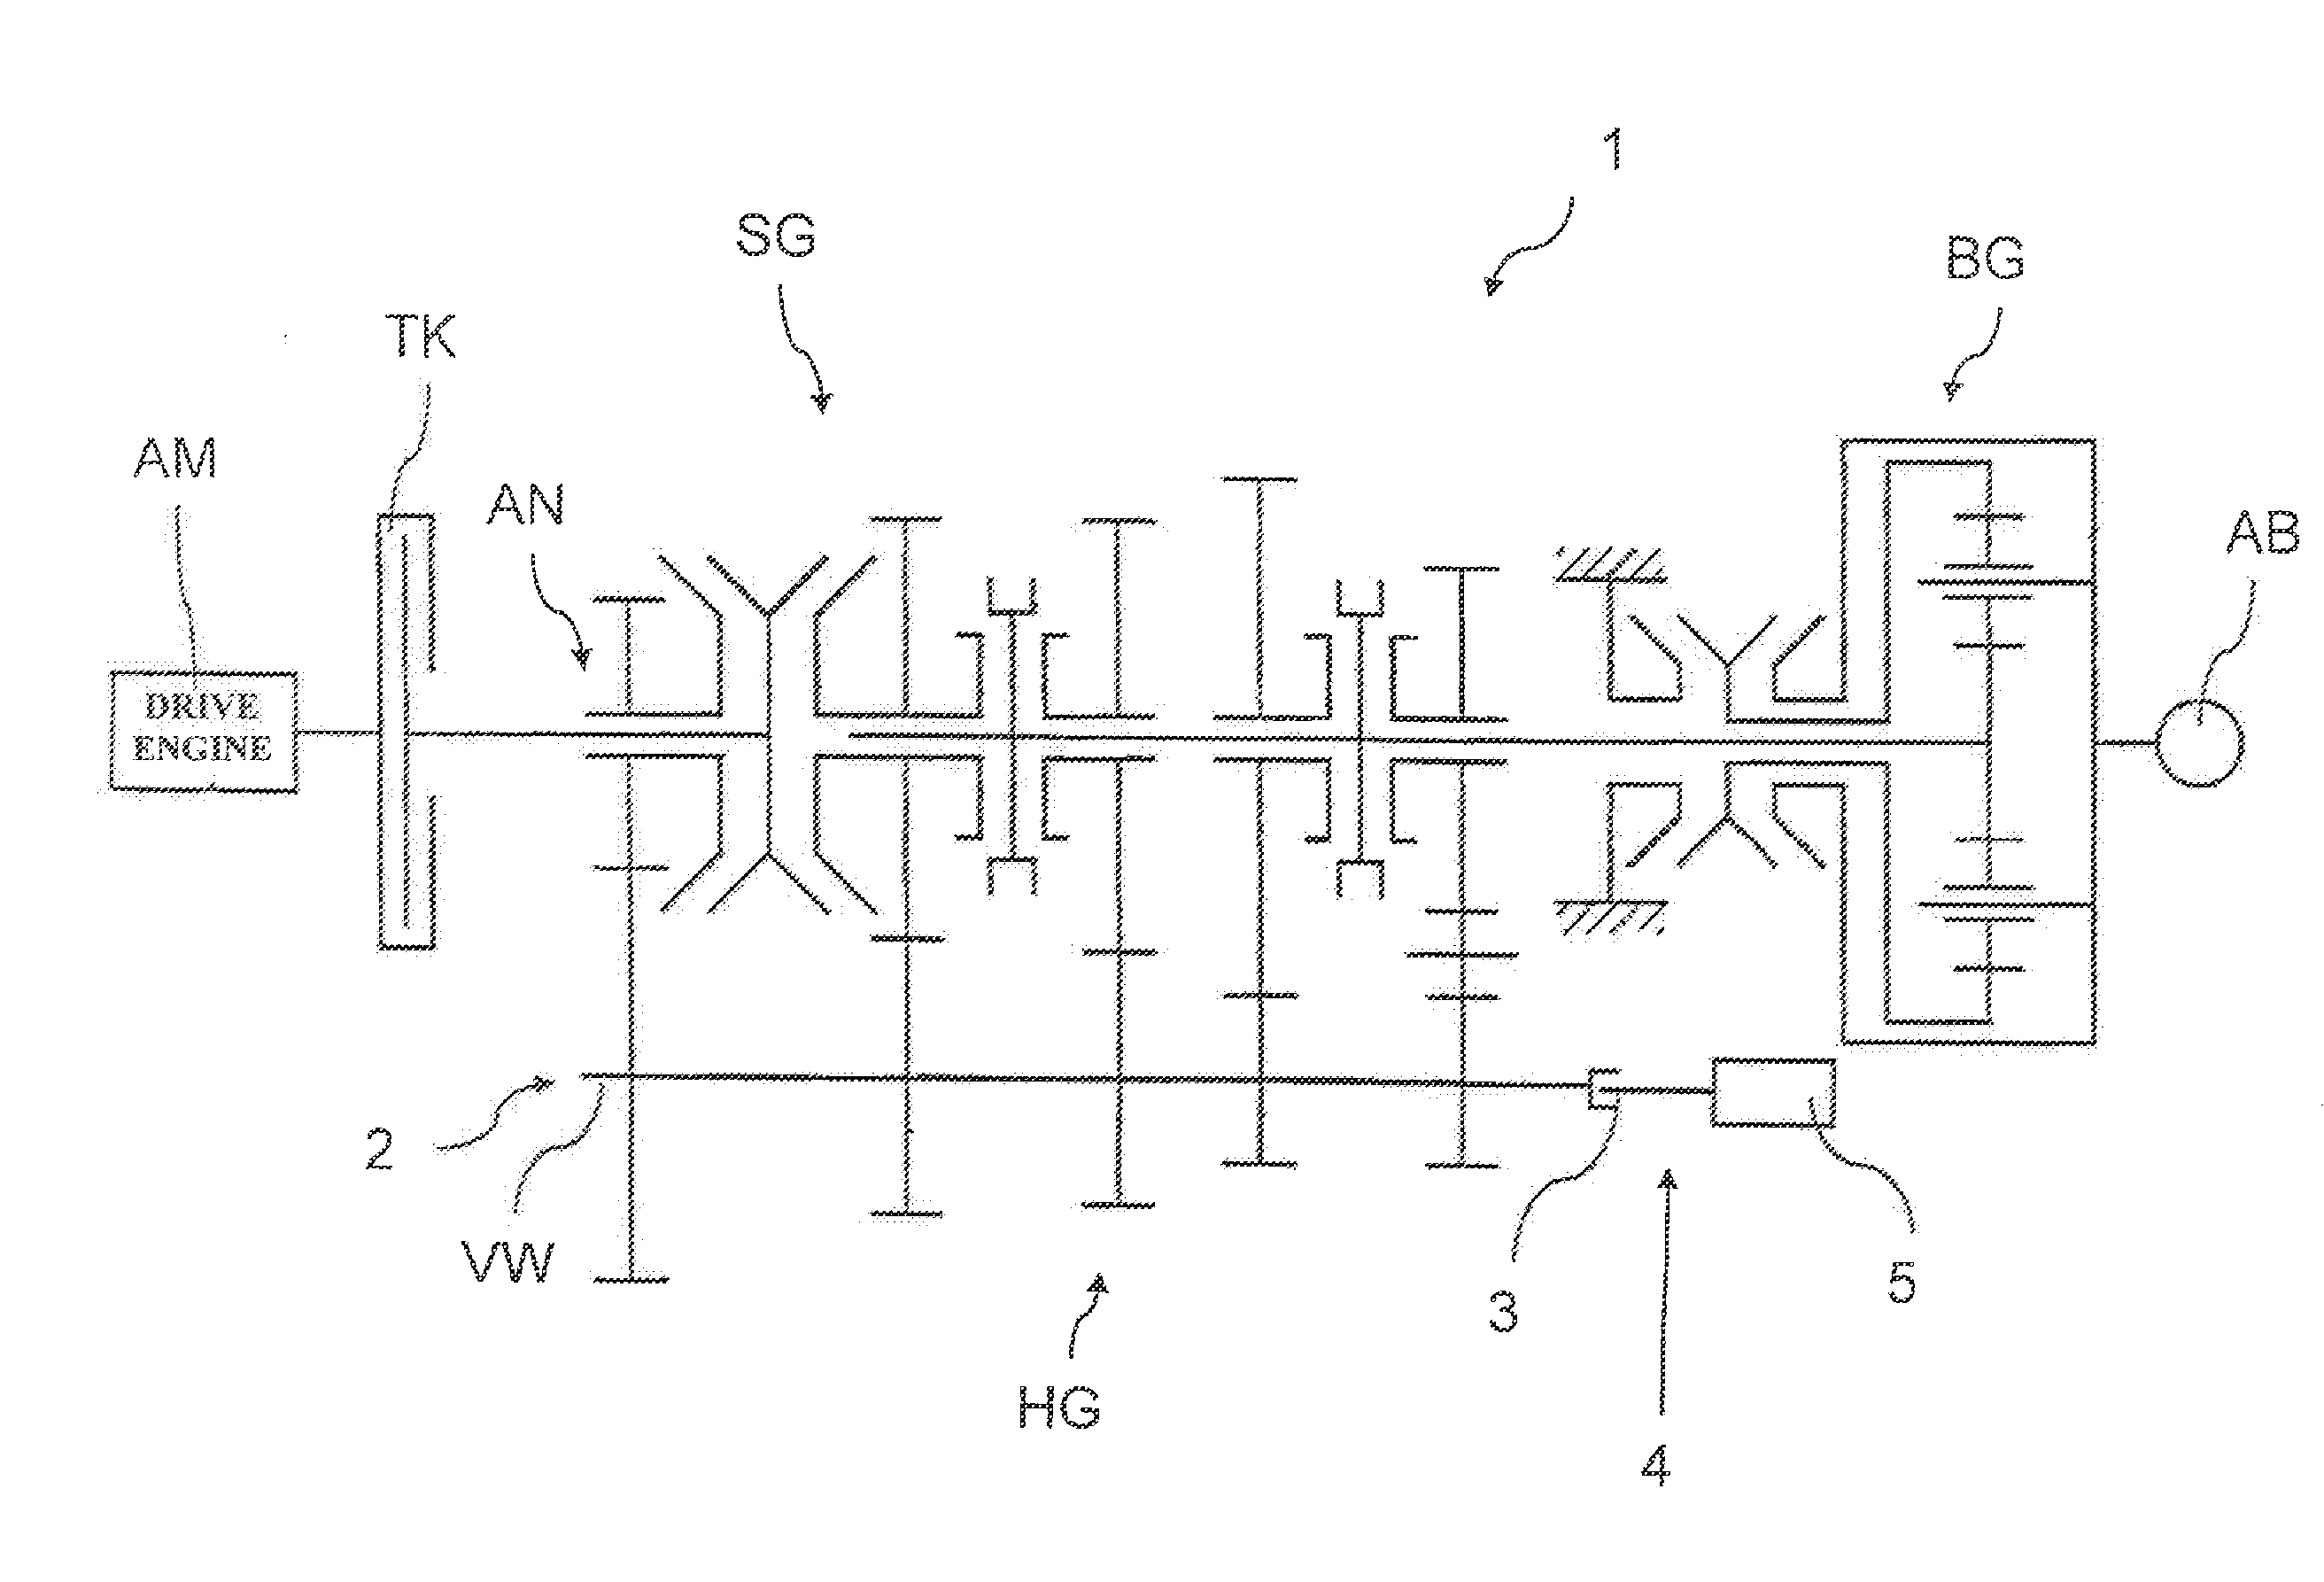 Method for decoupling a power take-off of a motor vehicle transmission while driving a motor vehicle